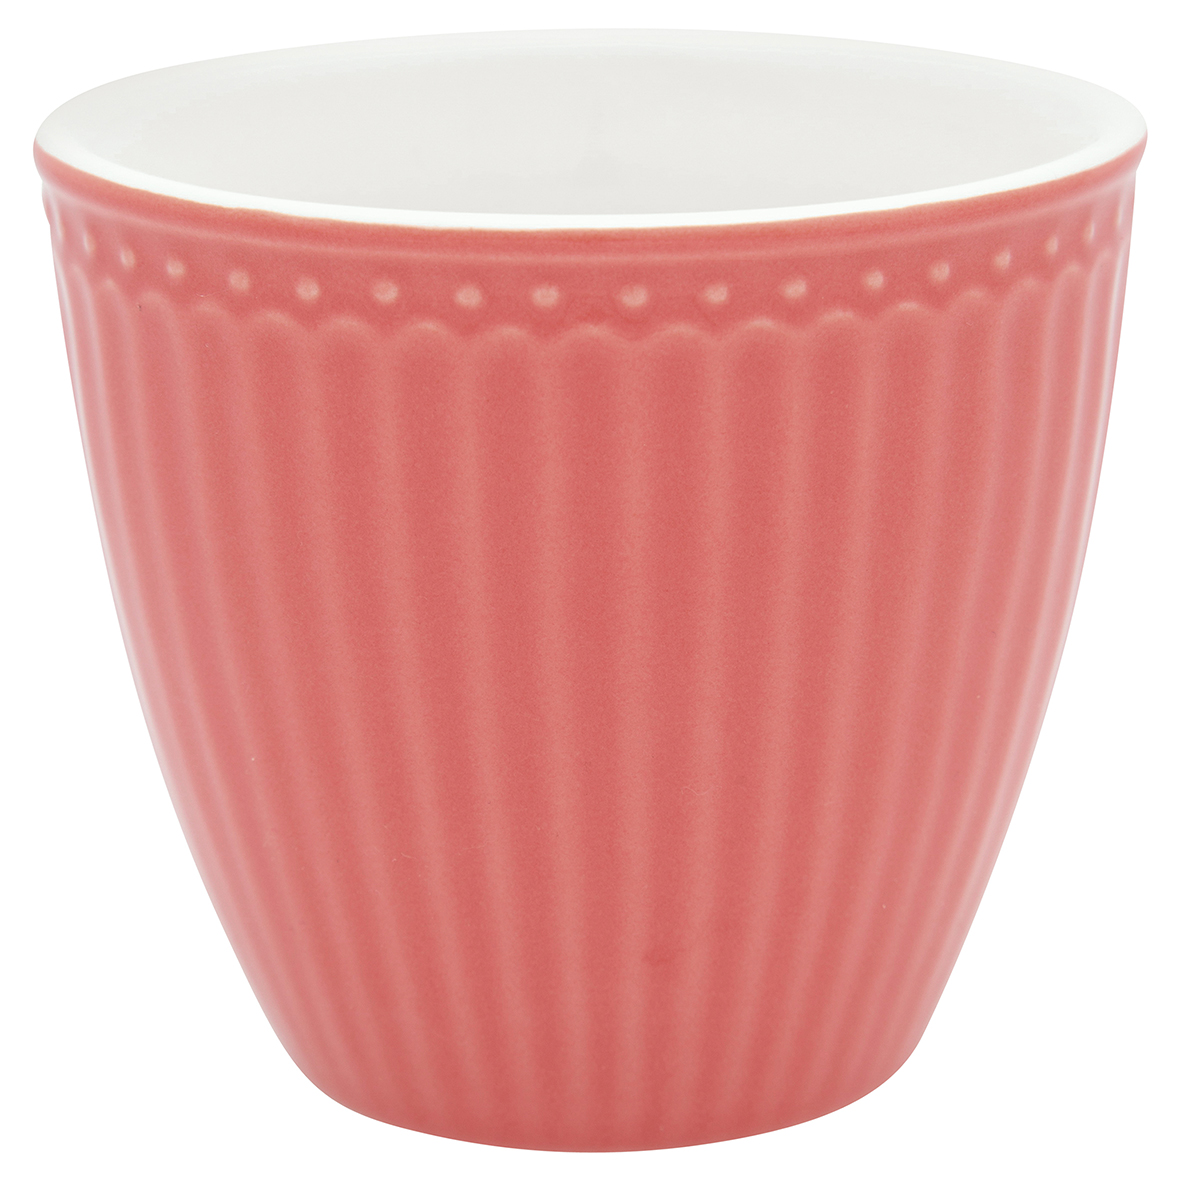 Greengate Lattecup Alice coral Everyday